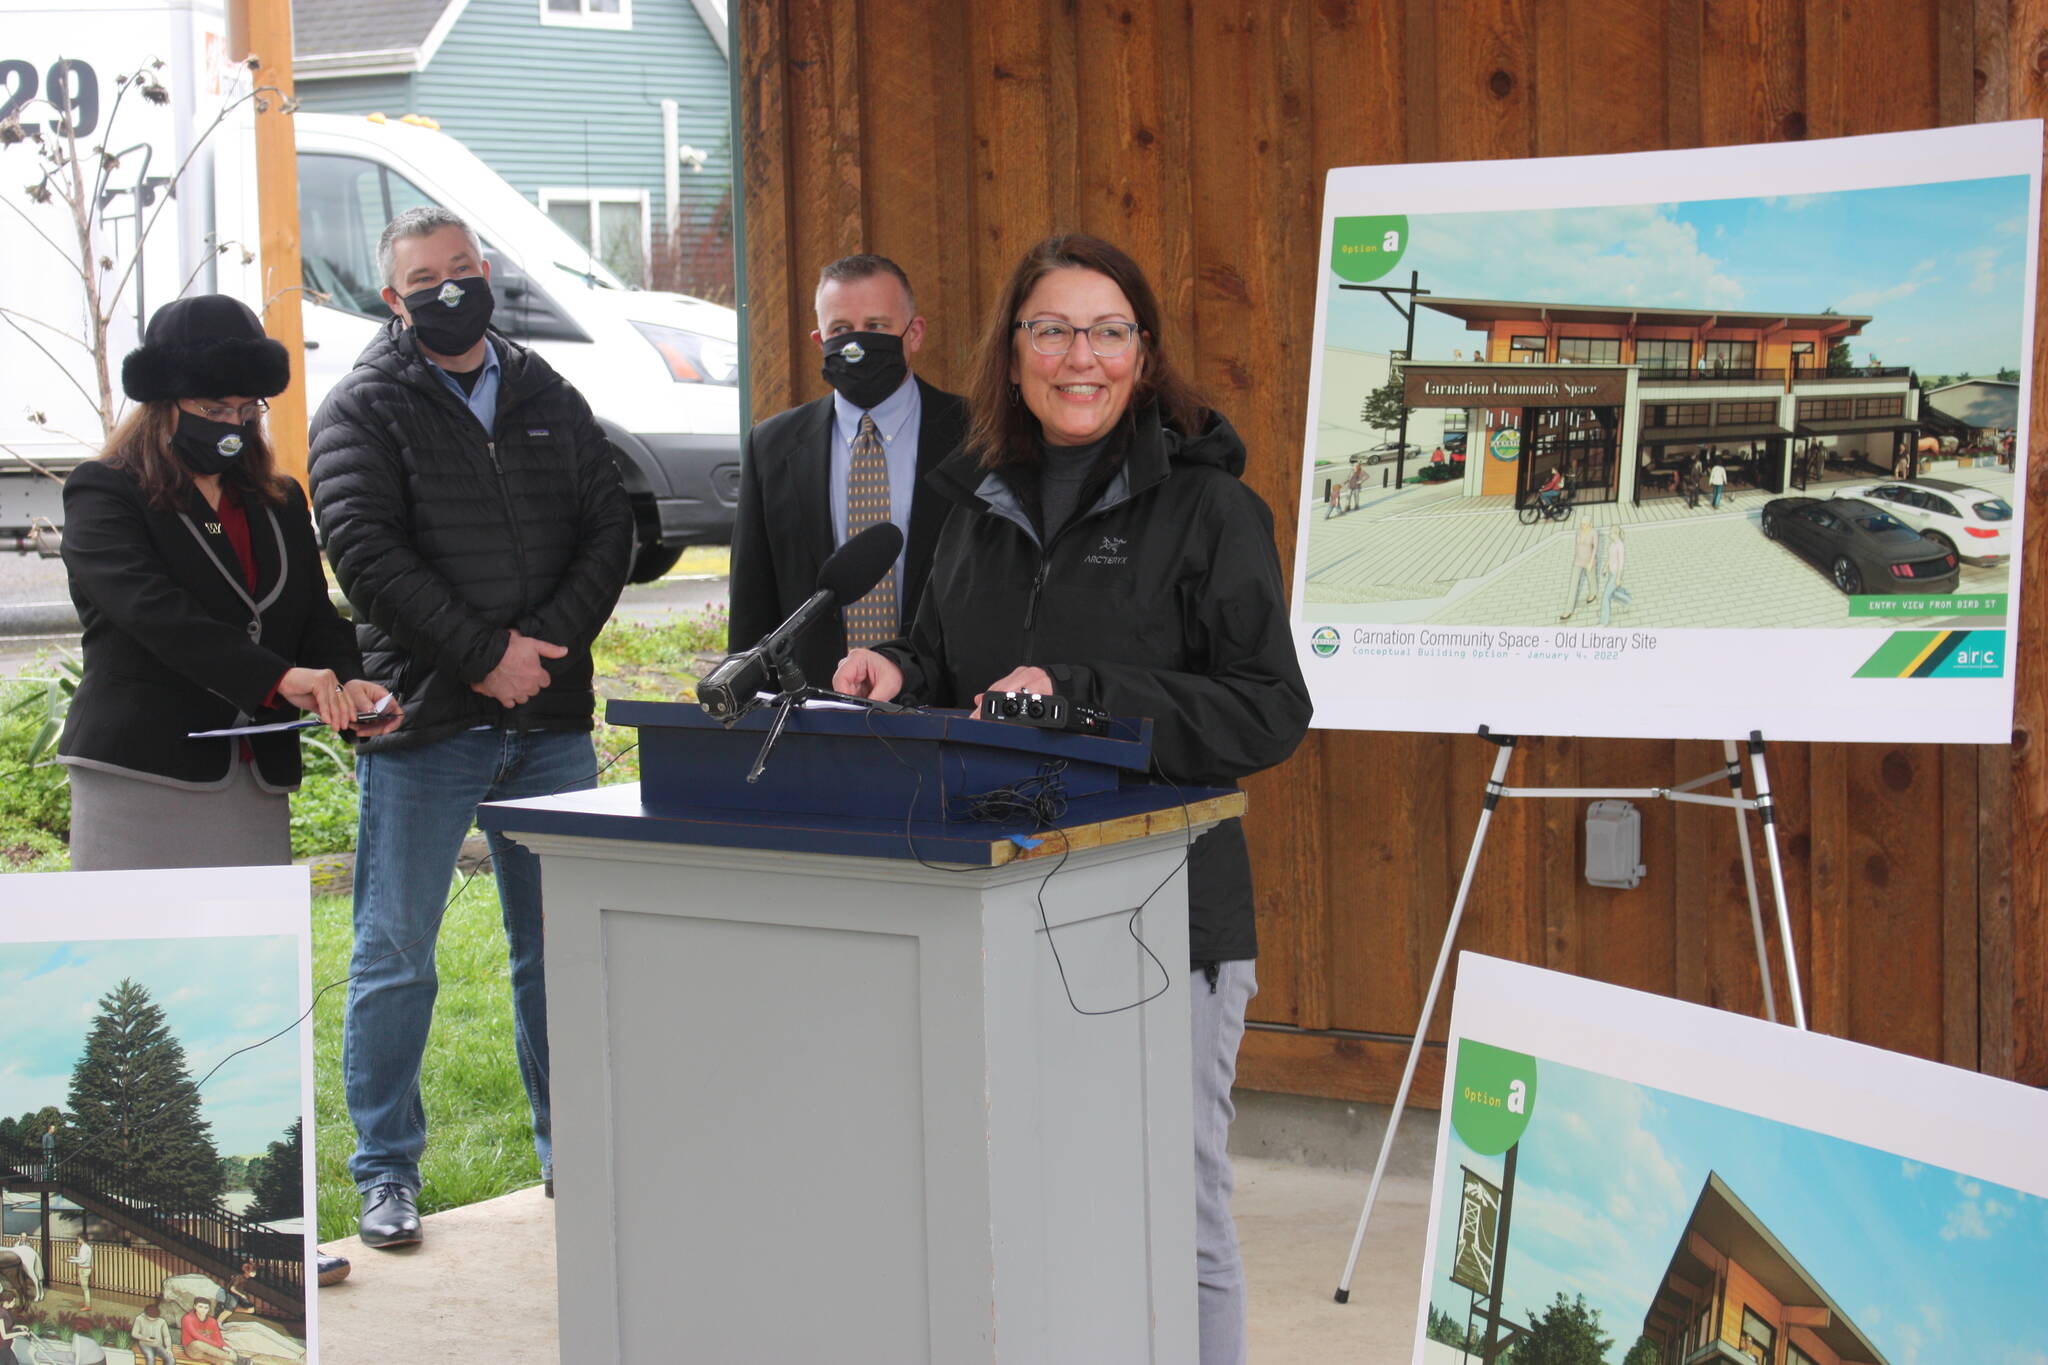 U.S. Rep Suzan DelBene announces funding for Community Center and Emergency Operations Center in Carnation (Cameron Sheppard/Sound Publishing.com)